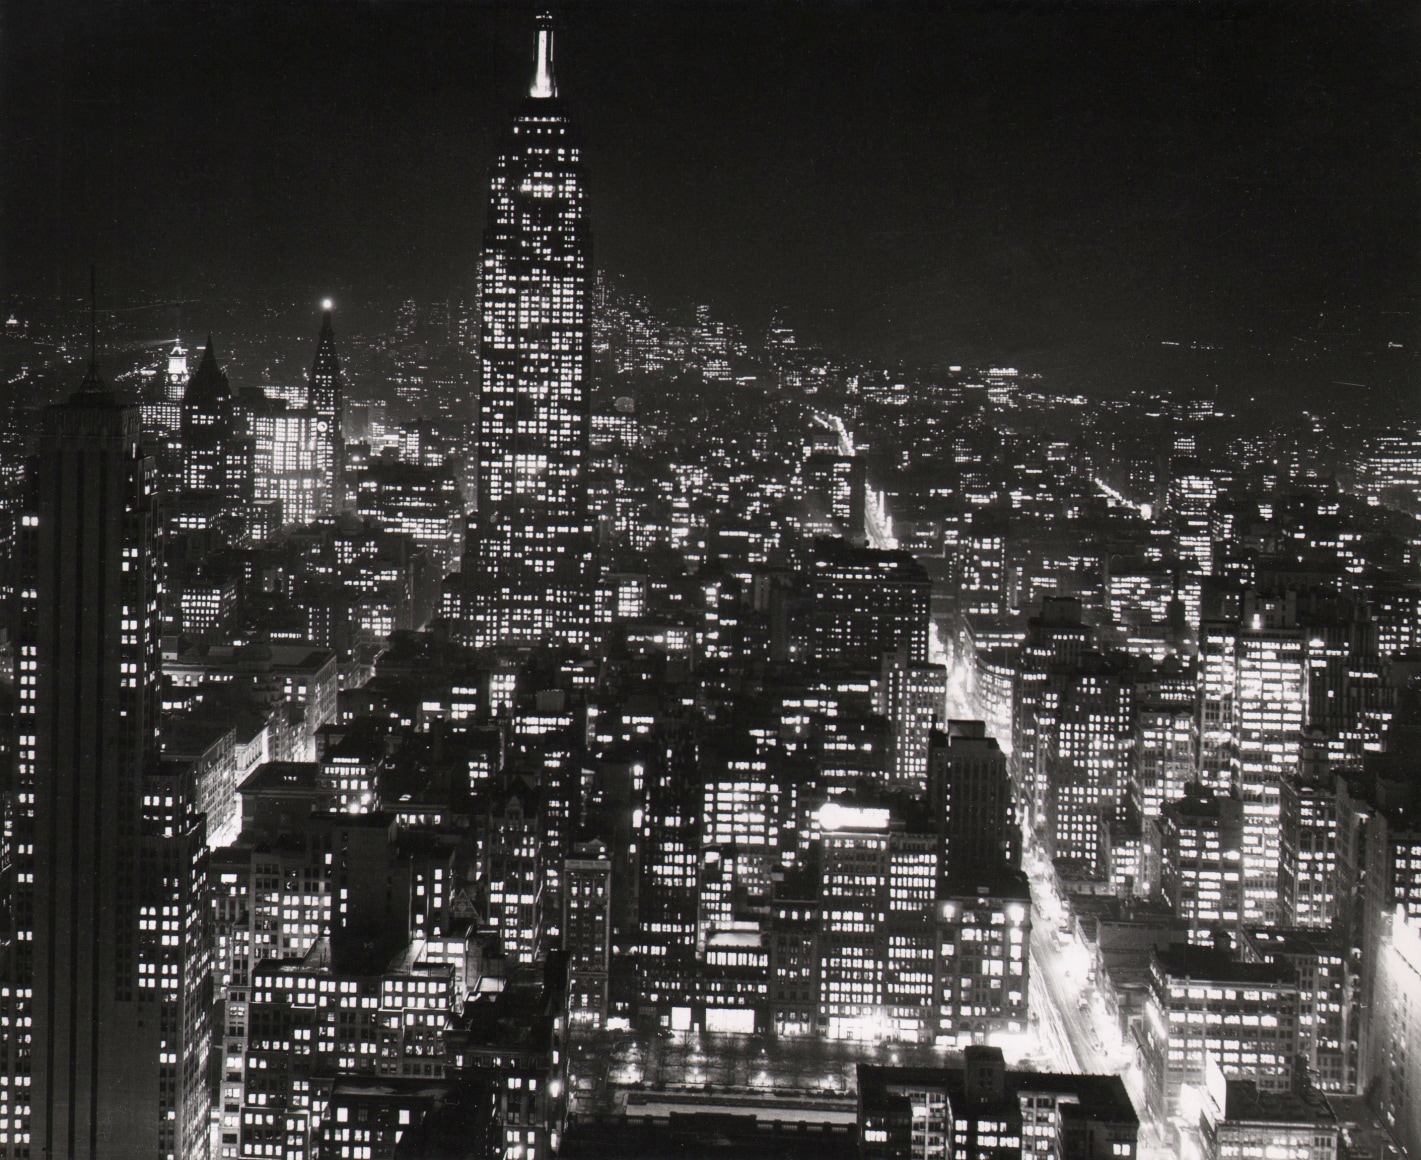 32. Sheldon Hine, New York City at Night Atop Radio City, ​c. 1938. Nighttime cityscape in a horizontal composition with the Empire State in the top left quadrant of the frame.